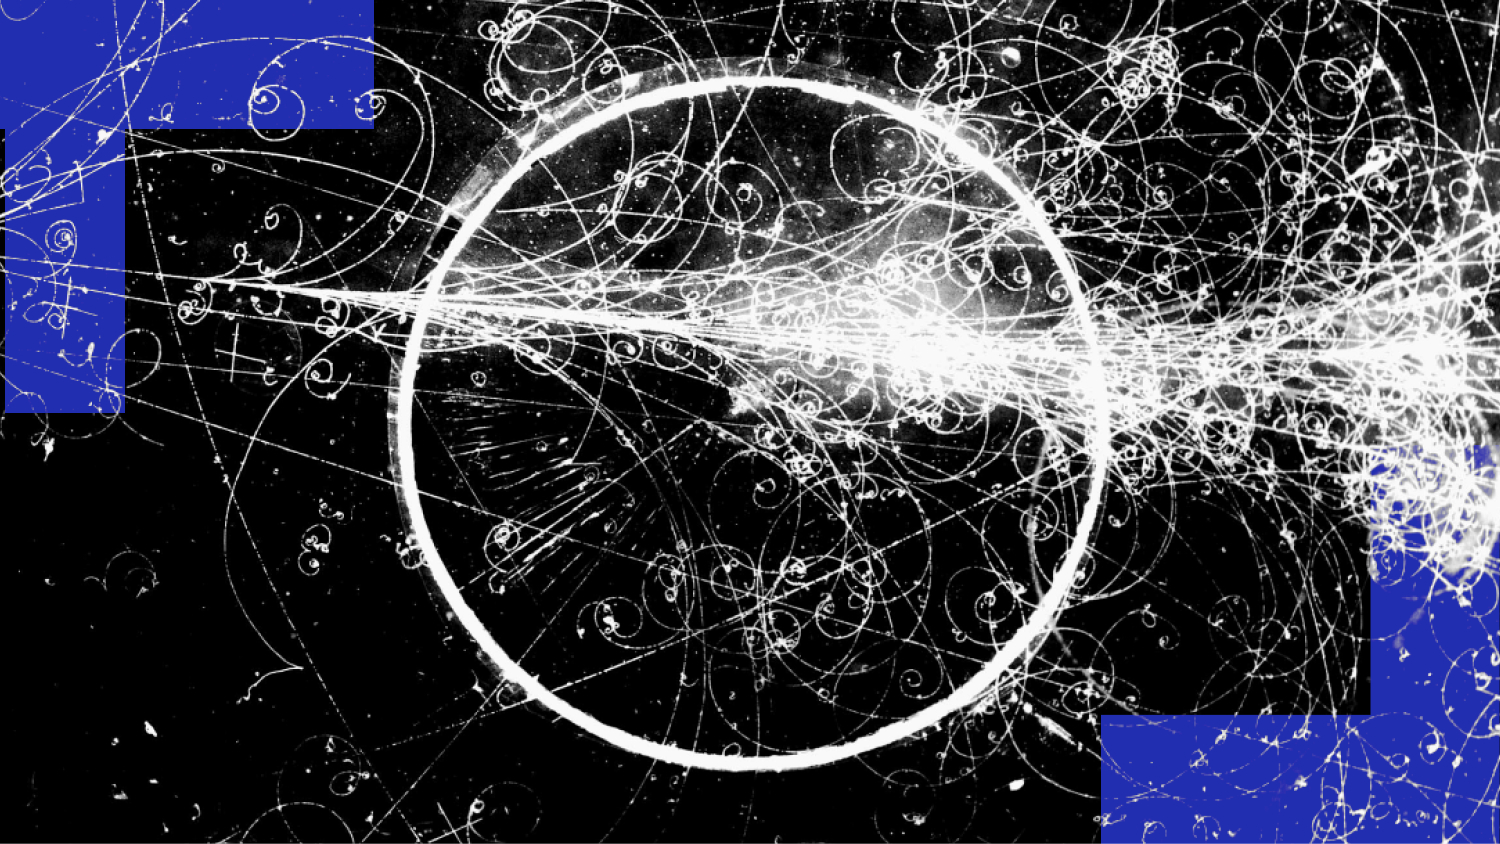 A digital abstract composition with dynamic white lines and swirls on a black background, incorporating some blue rectangular shapes that appear to disappear like antimatter.